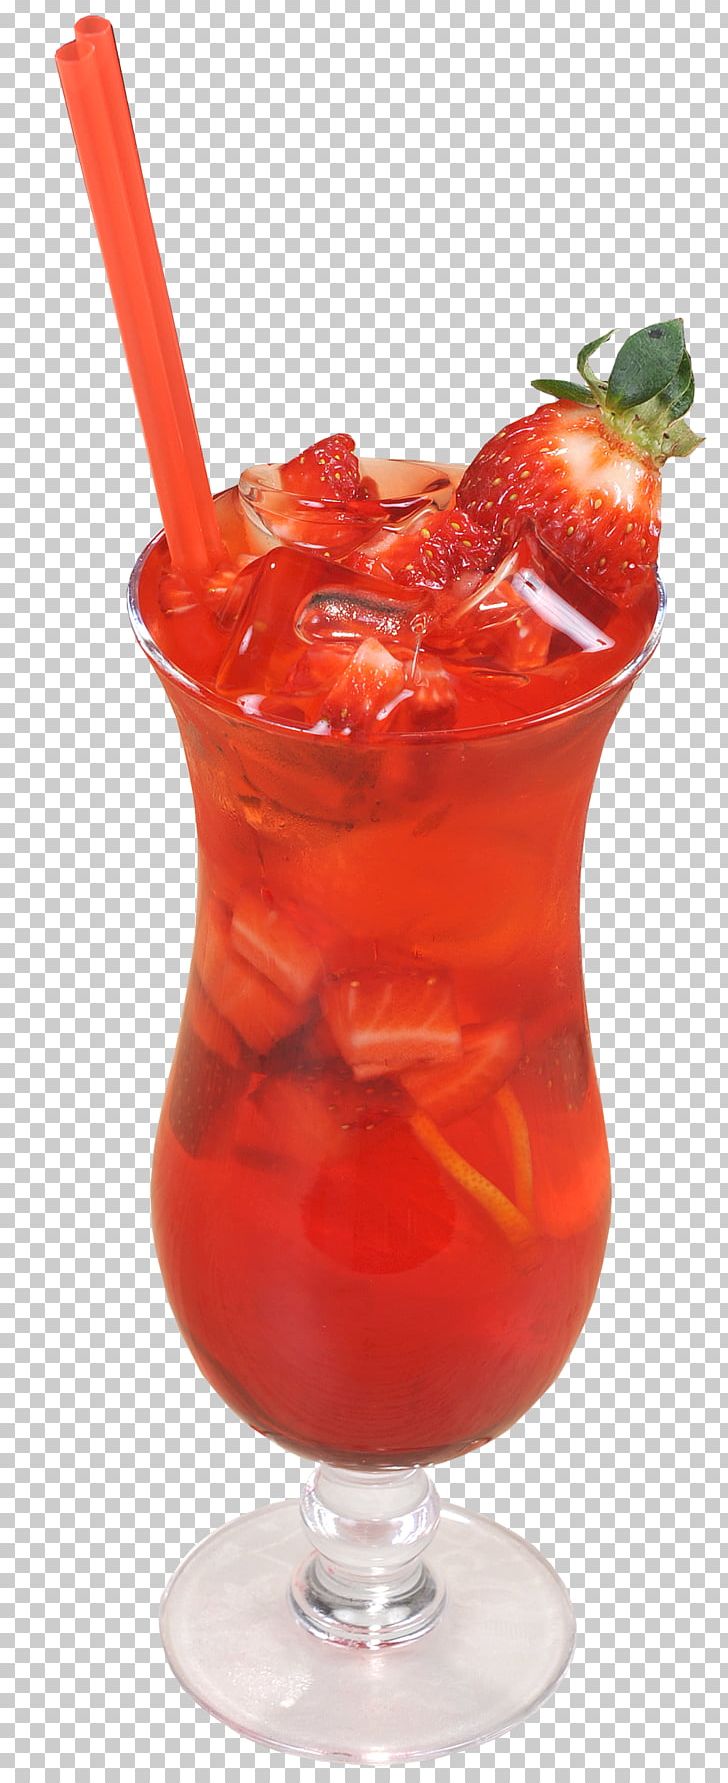 Lemonade Cocktail Garnish Strawberry Juice Sea Breeze PNG, Clipart, Bacardi Cocktail, Bloody Mary, Caipirinha, Caipiroska, Cocktail Garnish Free PNG Download